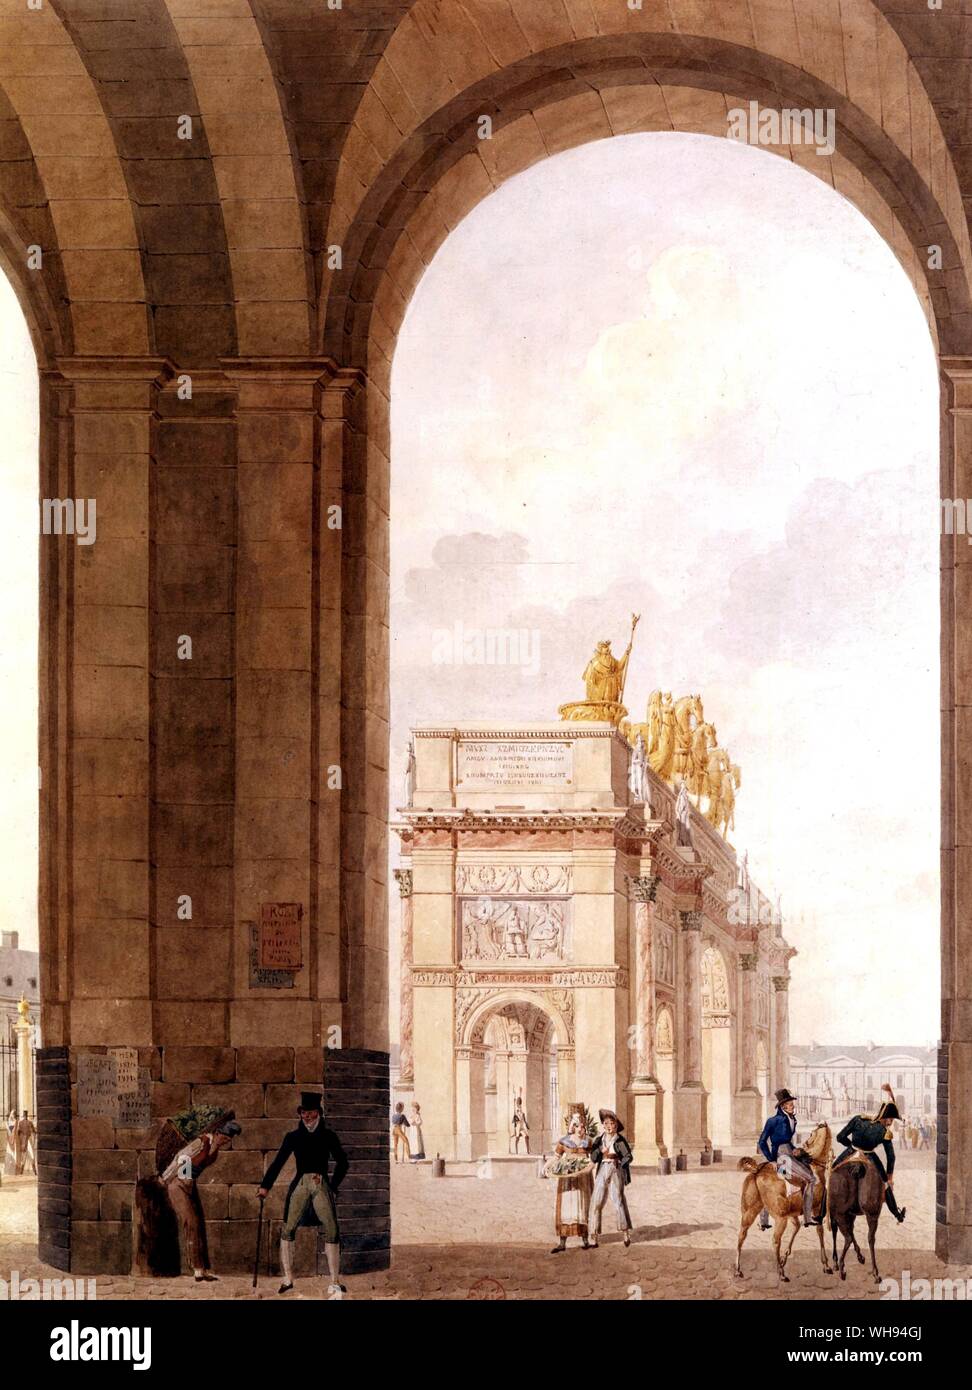 Vue de l'Arc de la Place du Caroussel - from under the passage de l'aile du midi. by Percier. Collection Destailleur. Bibliotheque Nationale, Paris. Charles Percier (Paris, August 22, 1764 - Paris, September 5, 1838) was a neoclassical French architect, interior decorator and designer, who worked in such close partnership with Pierre François Léonard Fontaine, originally his friend from student days, from 1794 onwards, that it is fruitless to disentangle artistic responsibilities in their work. Together, Percier and Fontaine were inventors and major proponents of the rich and grand, Stock Photo